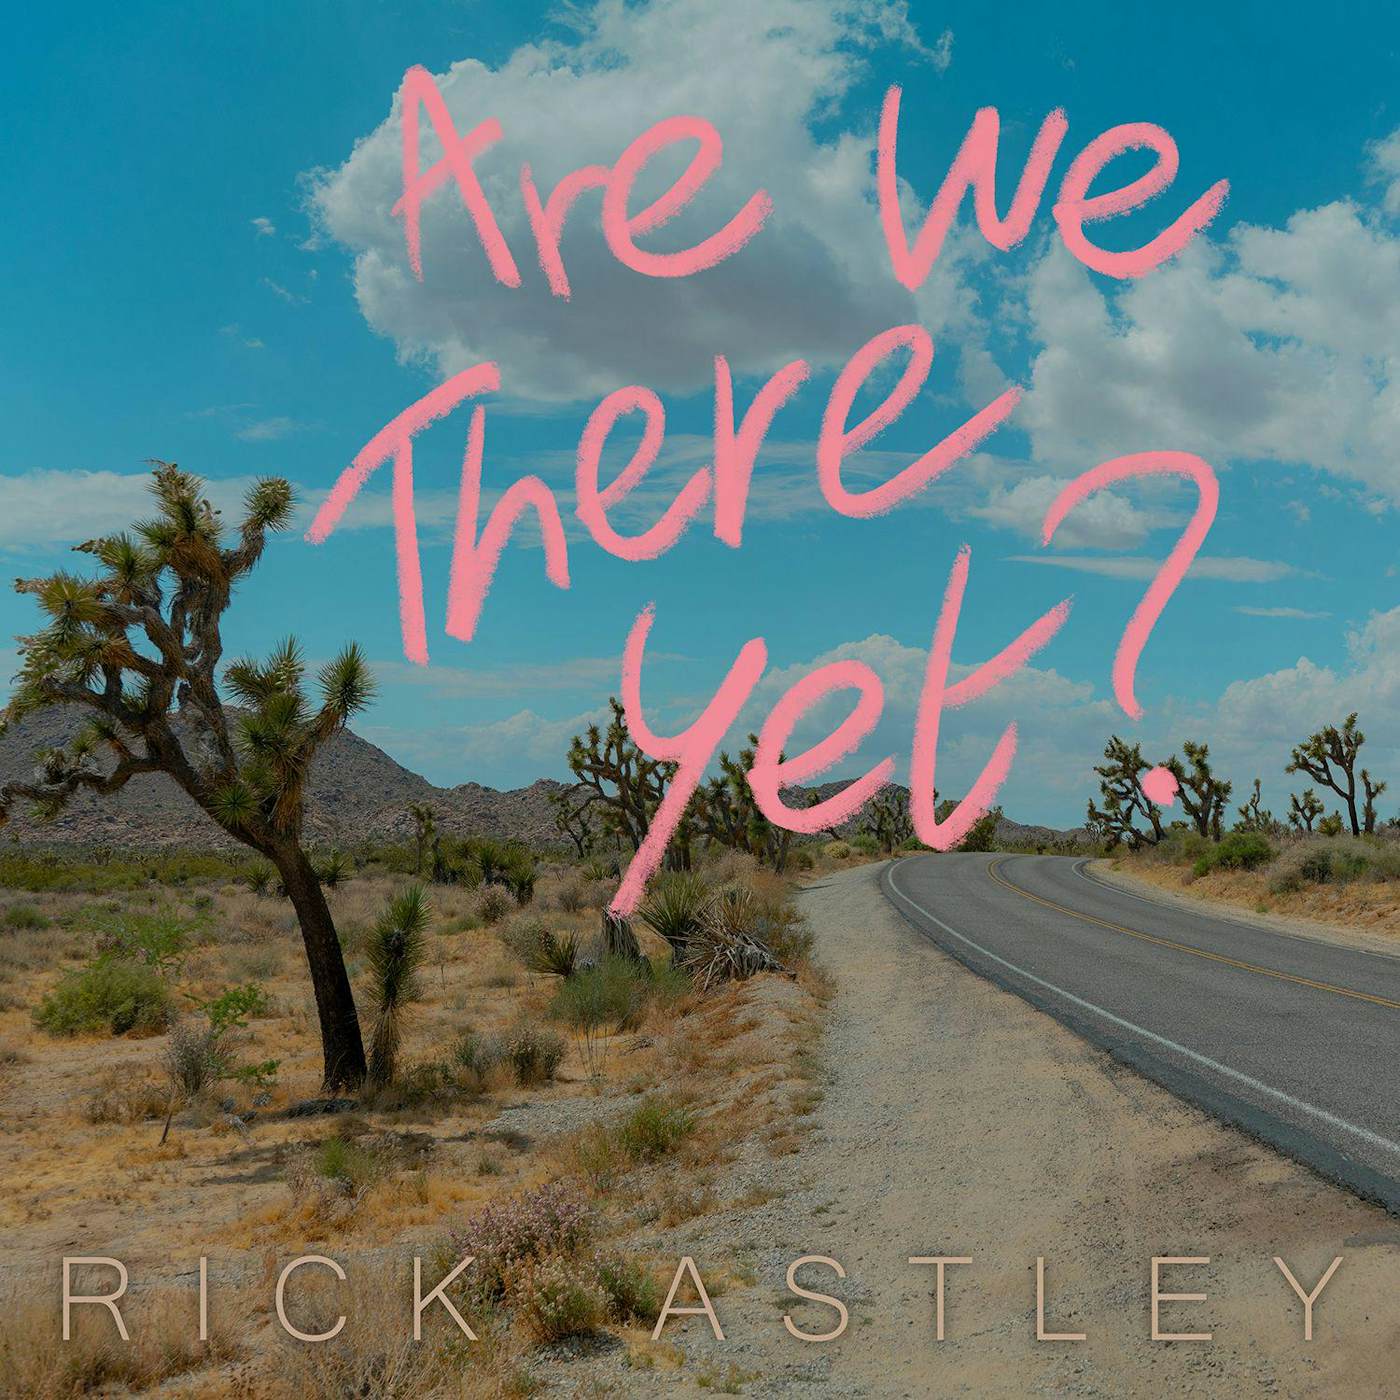 Rick Astley Are We There Yet Vinyl Record